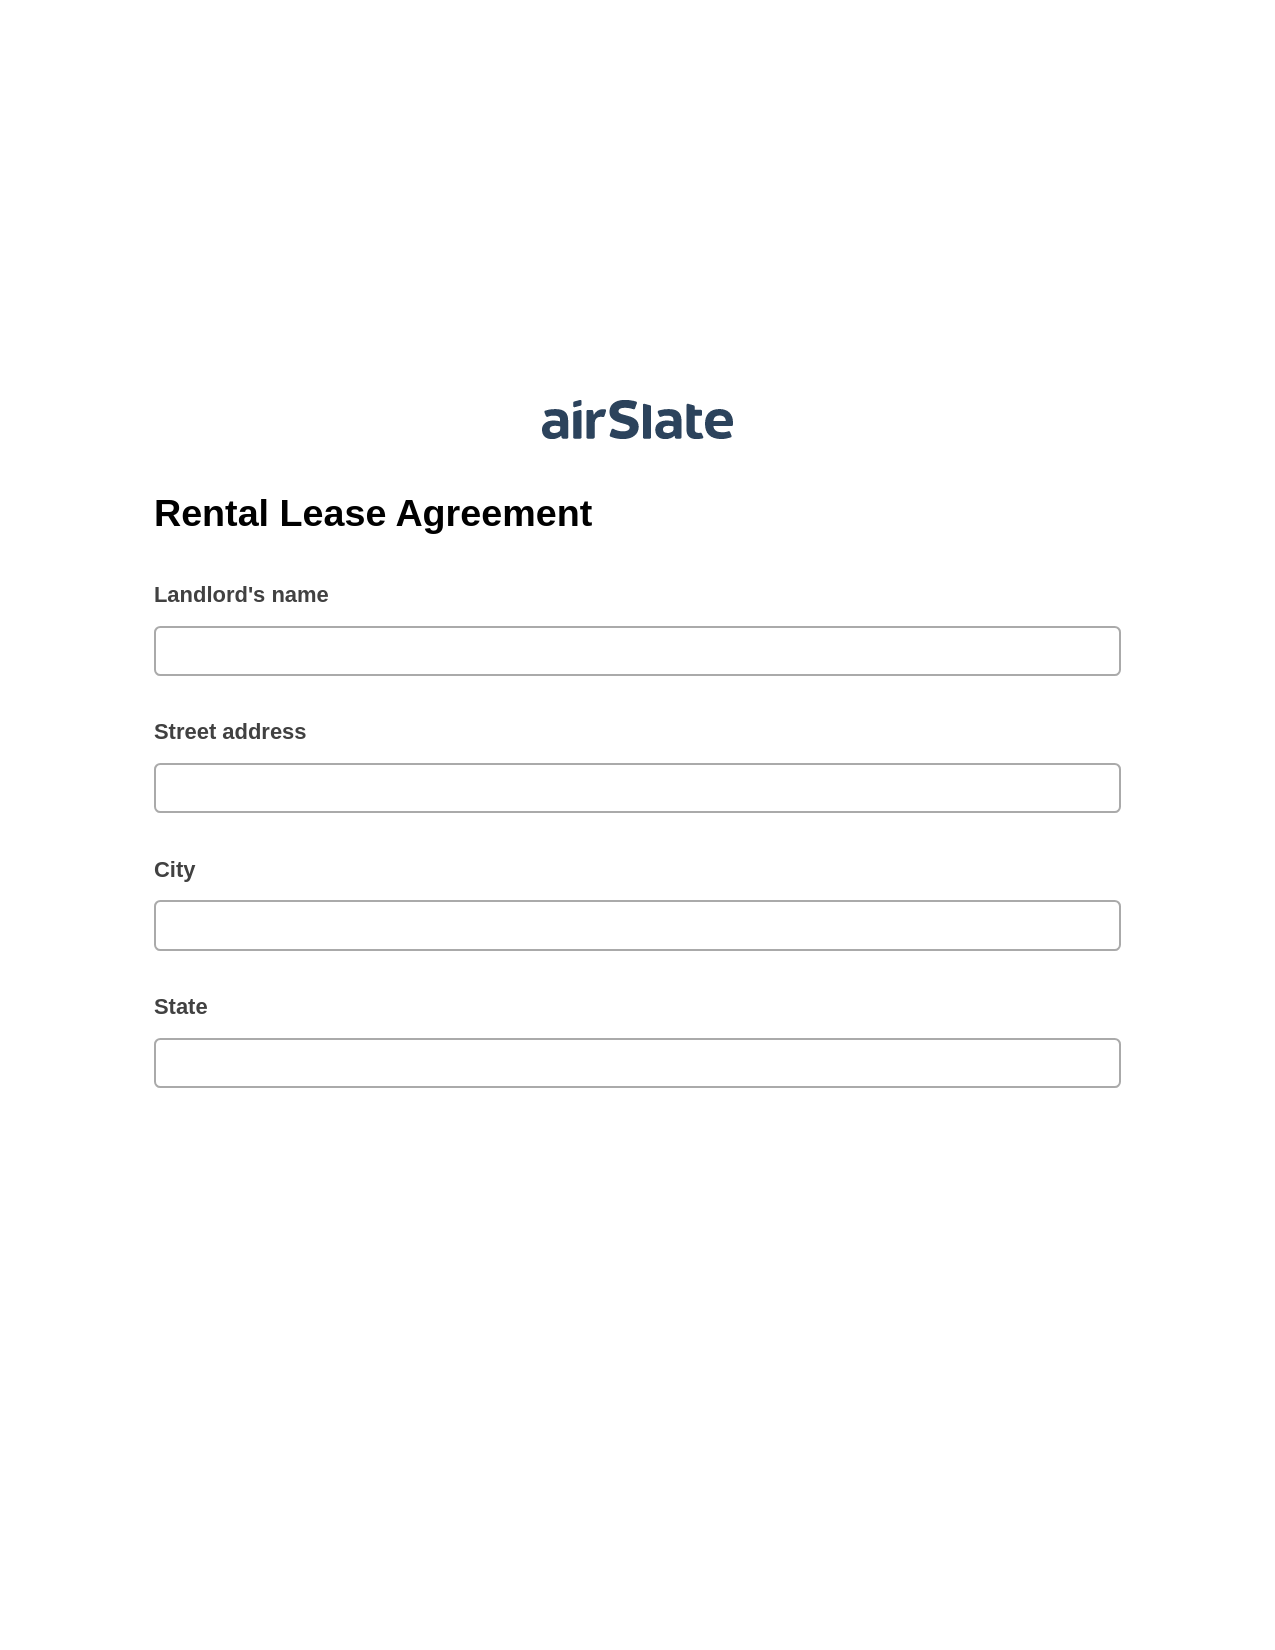 Multirole Rental Lease Agreement Pre-fill from Excel Spreadsheet Dropdown Options Bot, System Bot - Create a Slate in another Flow, Slack Notification Postfinish Bot